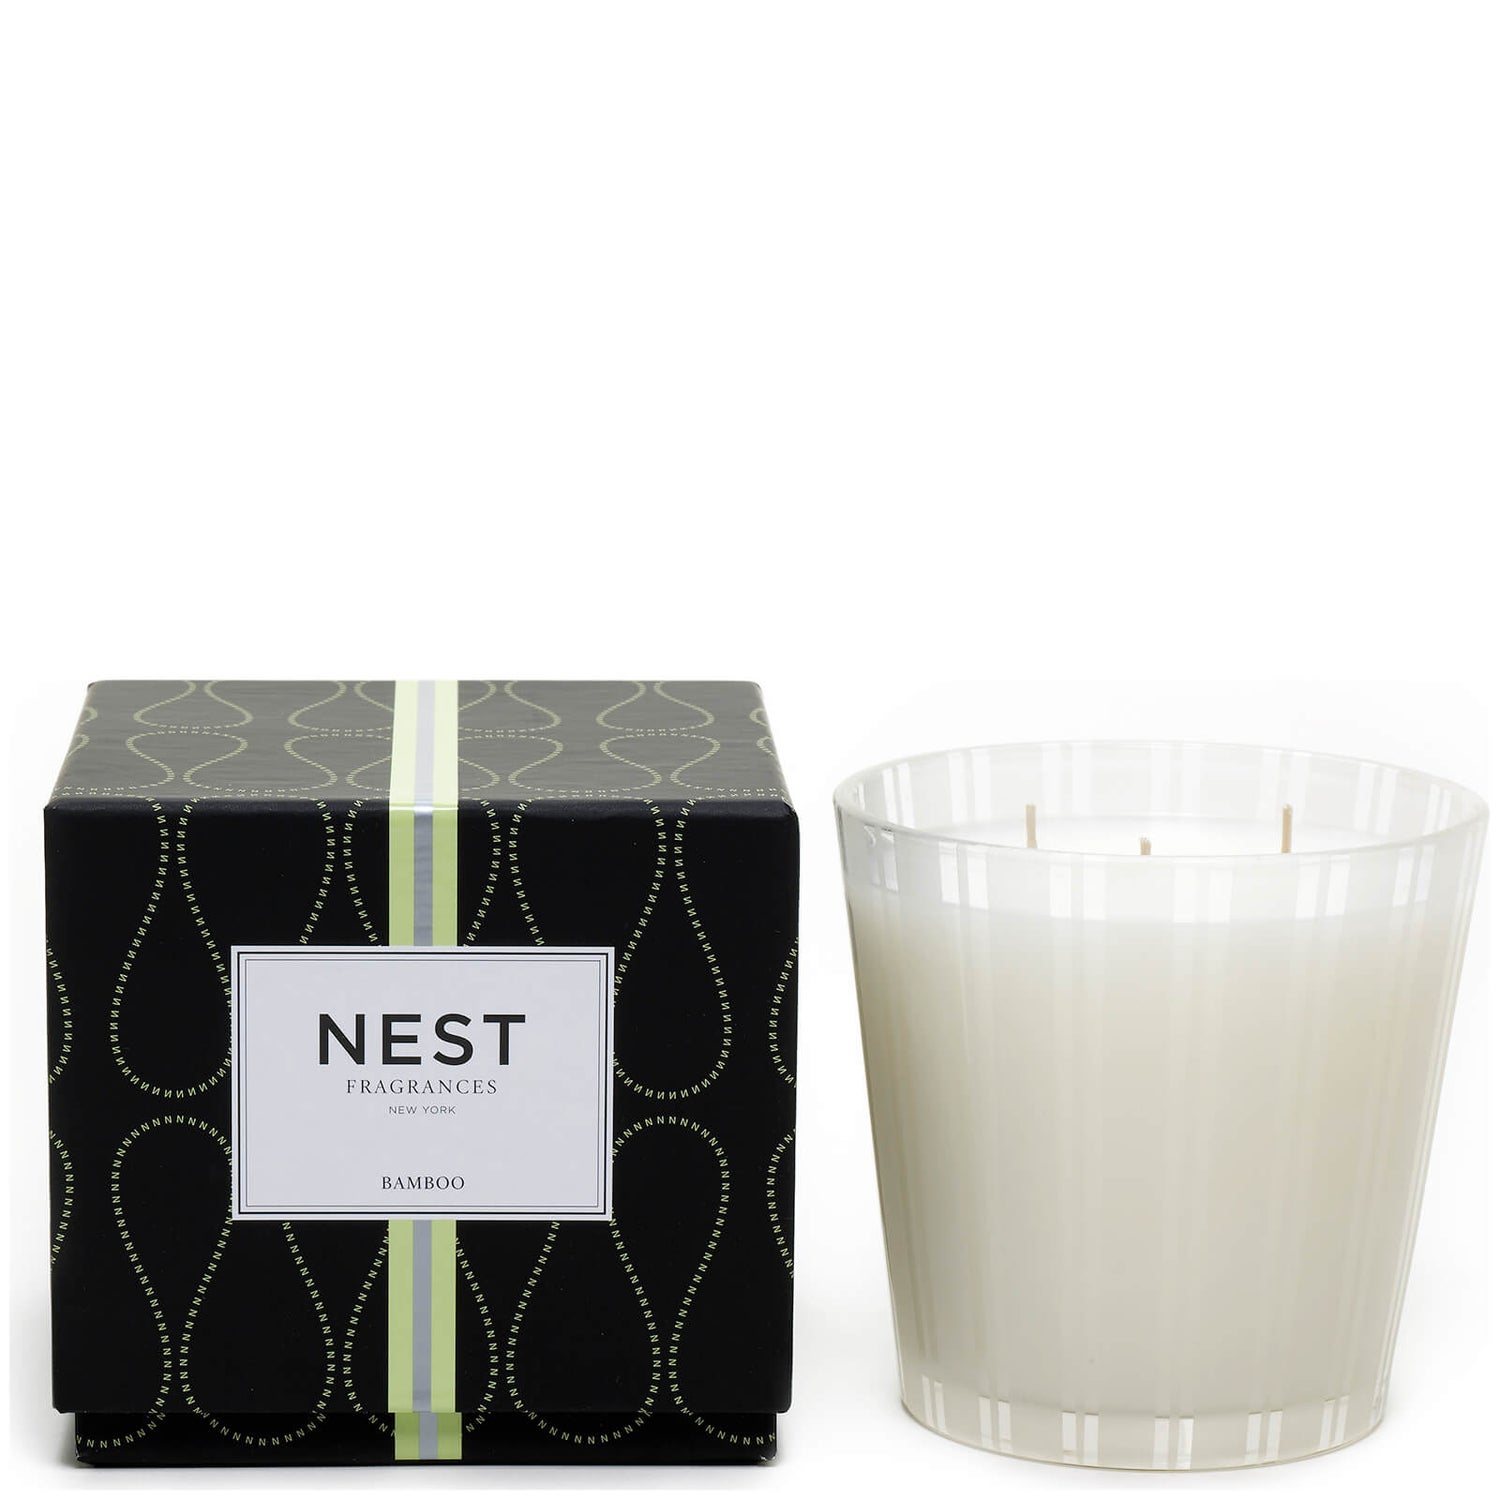 NEST Fragrances Bamboo 3-Wick Candle